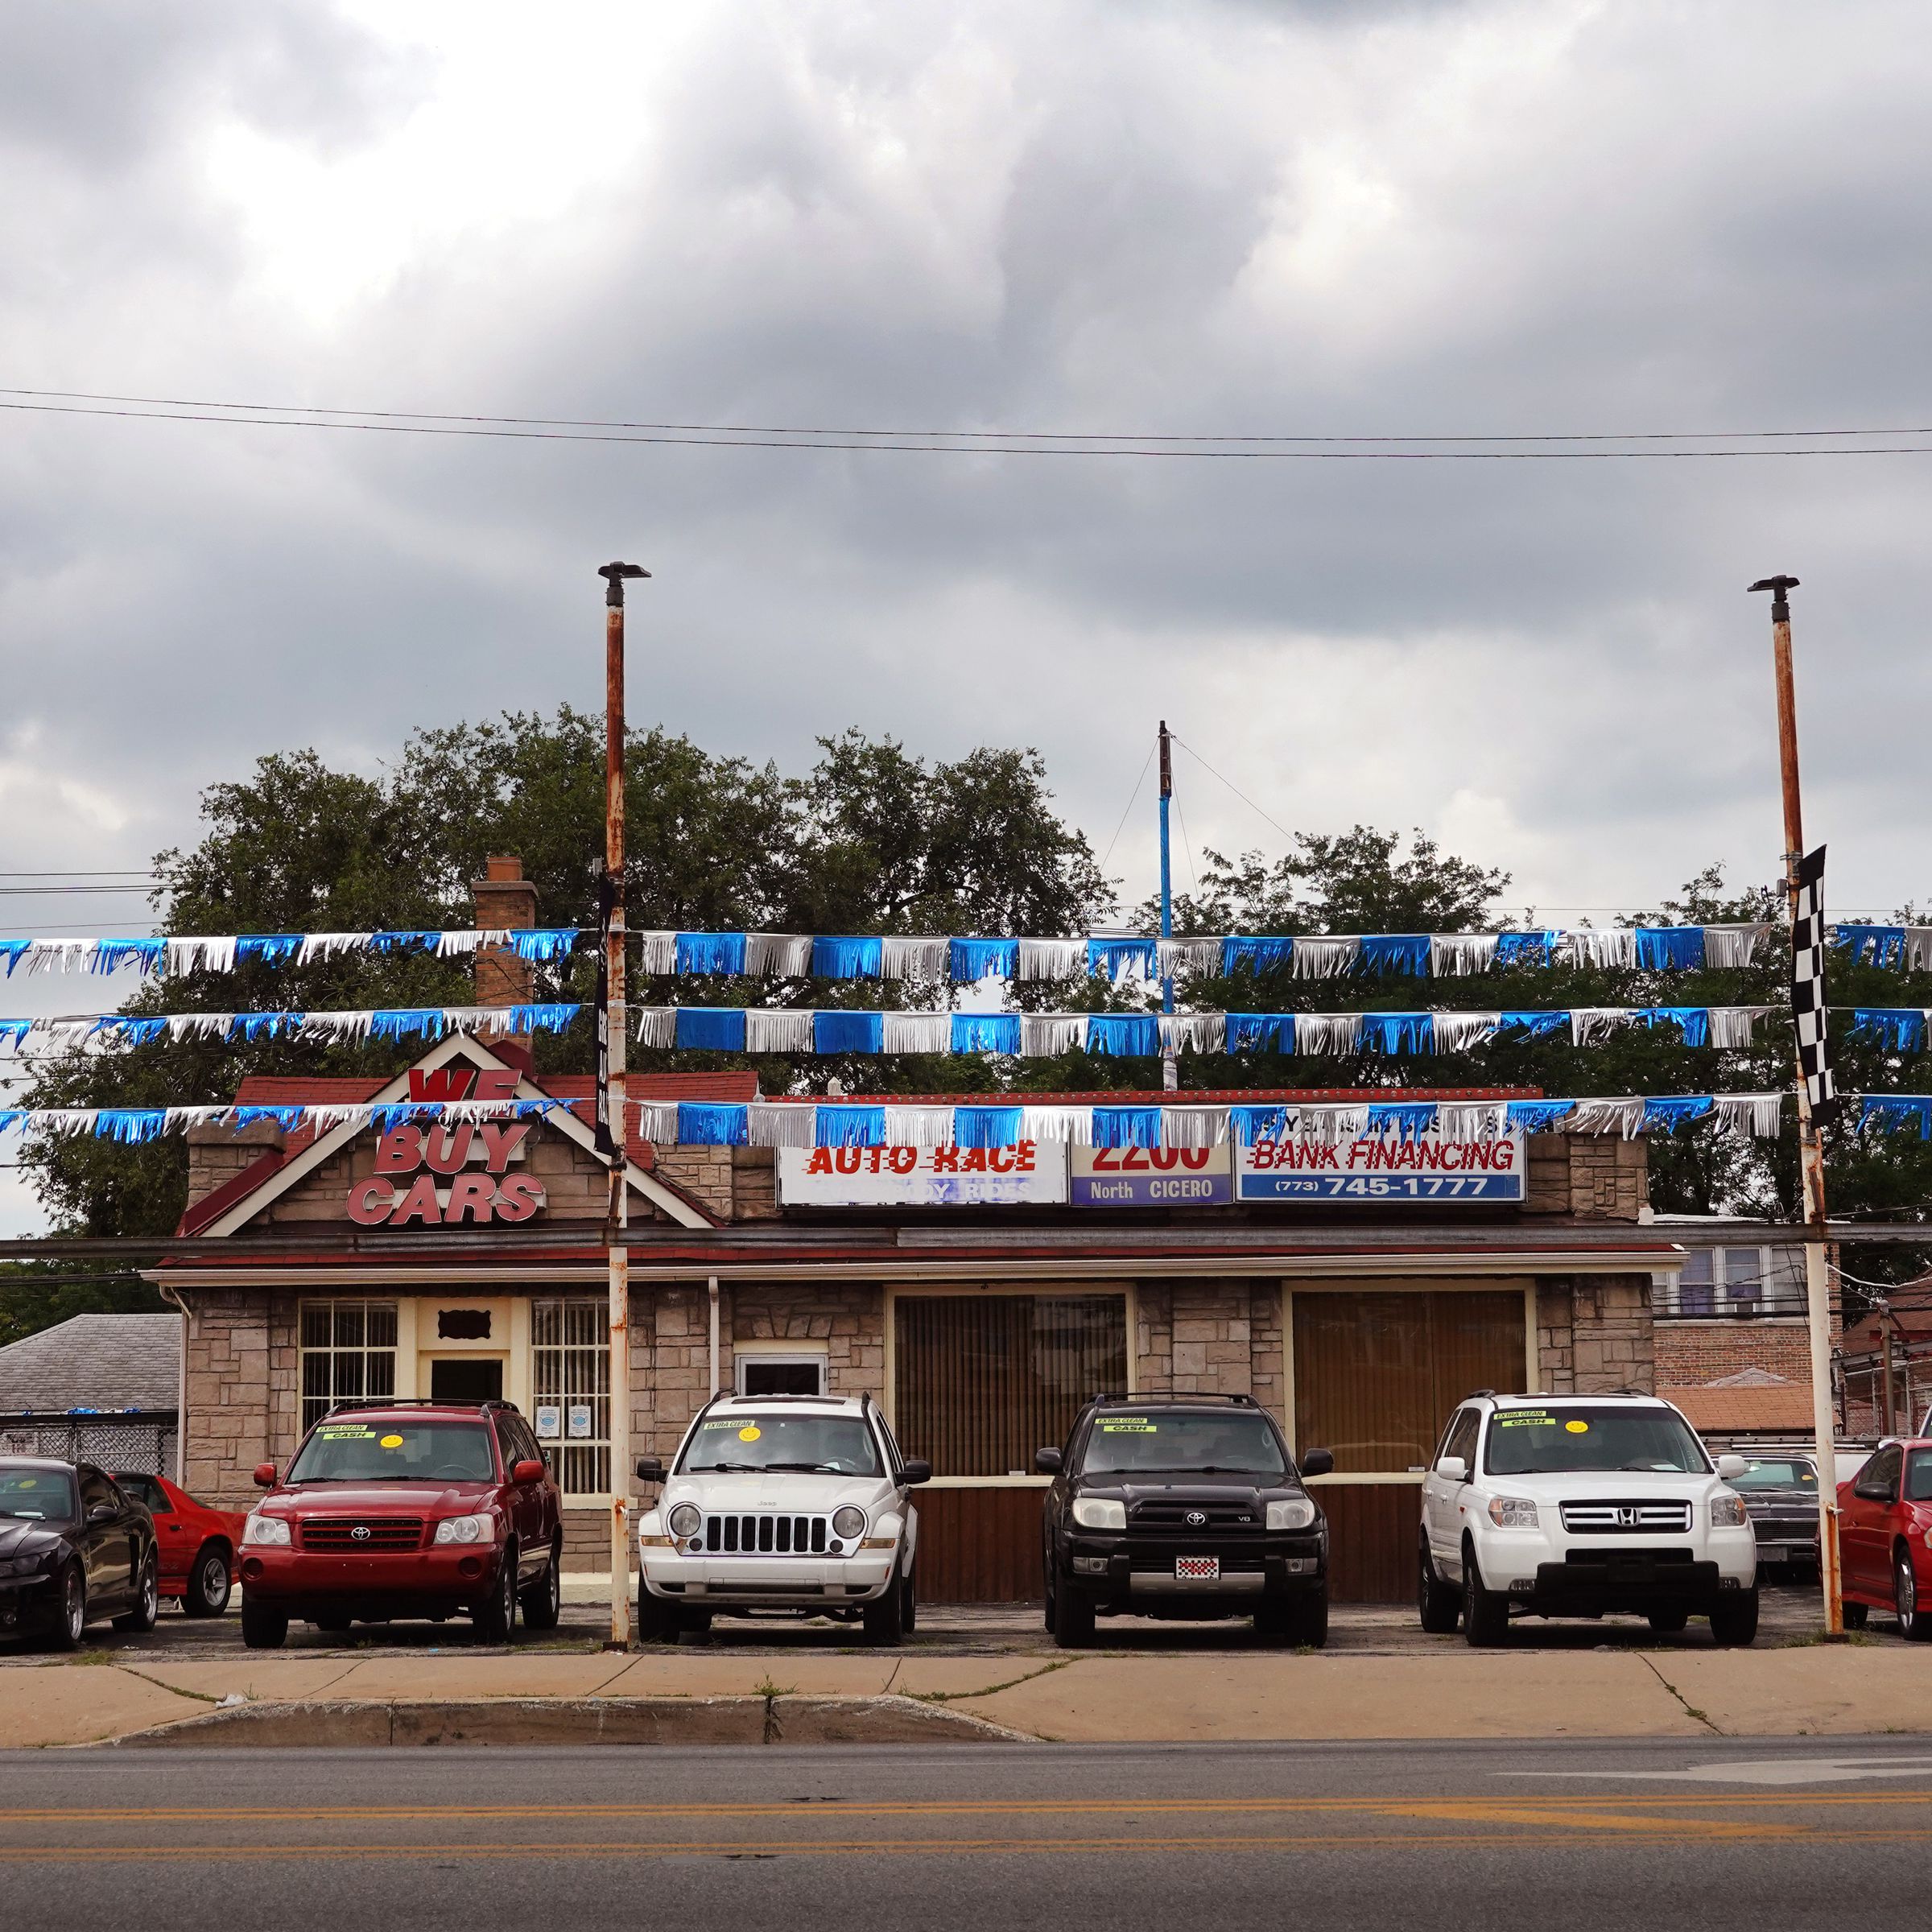 A picture of a car dealership showing the front of several cars in a lot, three blue and silver lines of streamers strung from poles above, and a small building behind them, on a cloudy day.